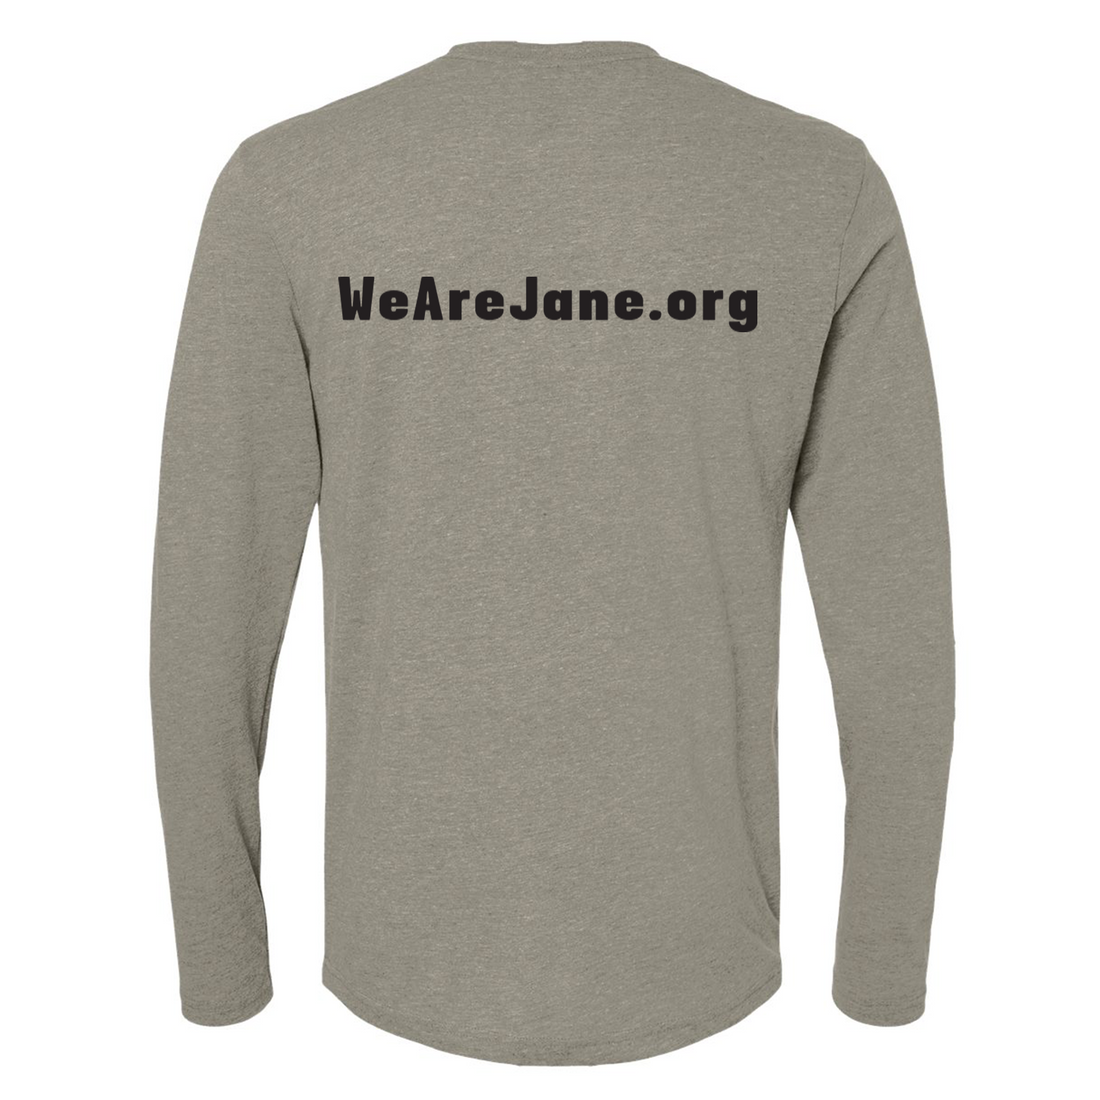 Unisex JANE Long Sleeve T-Shirt in Grey with Black Letters